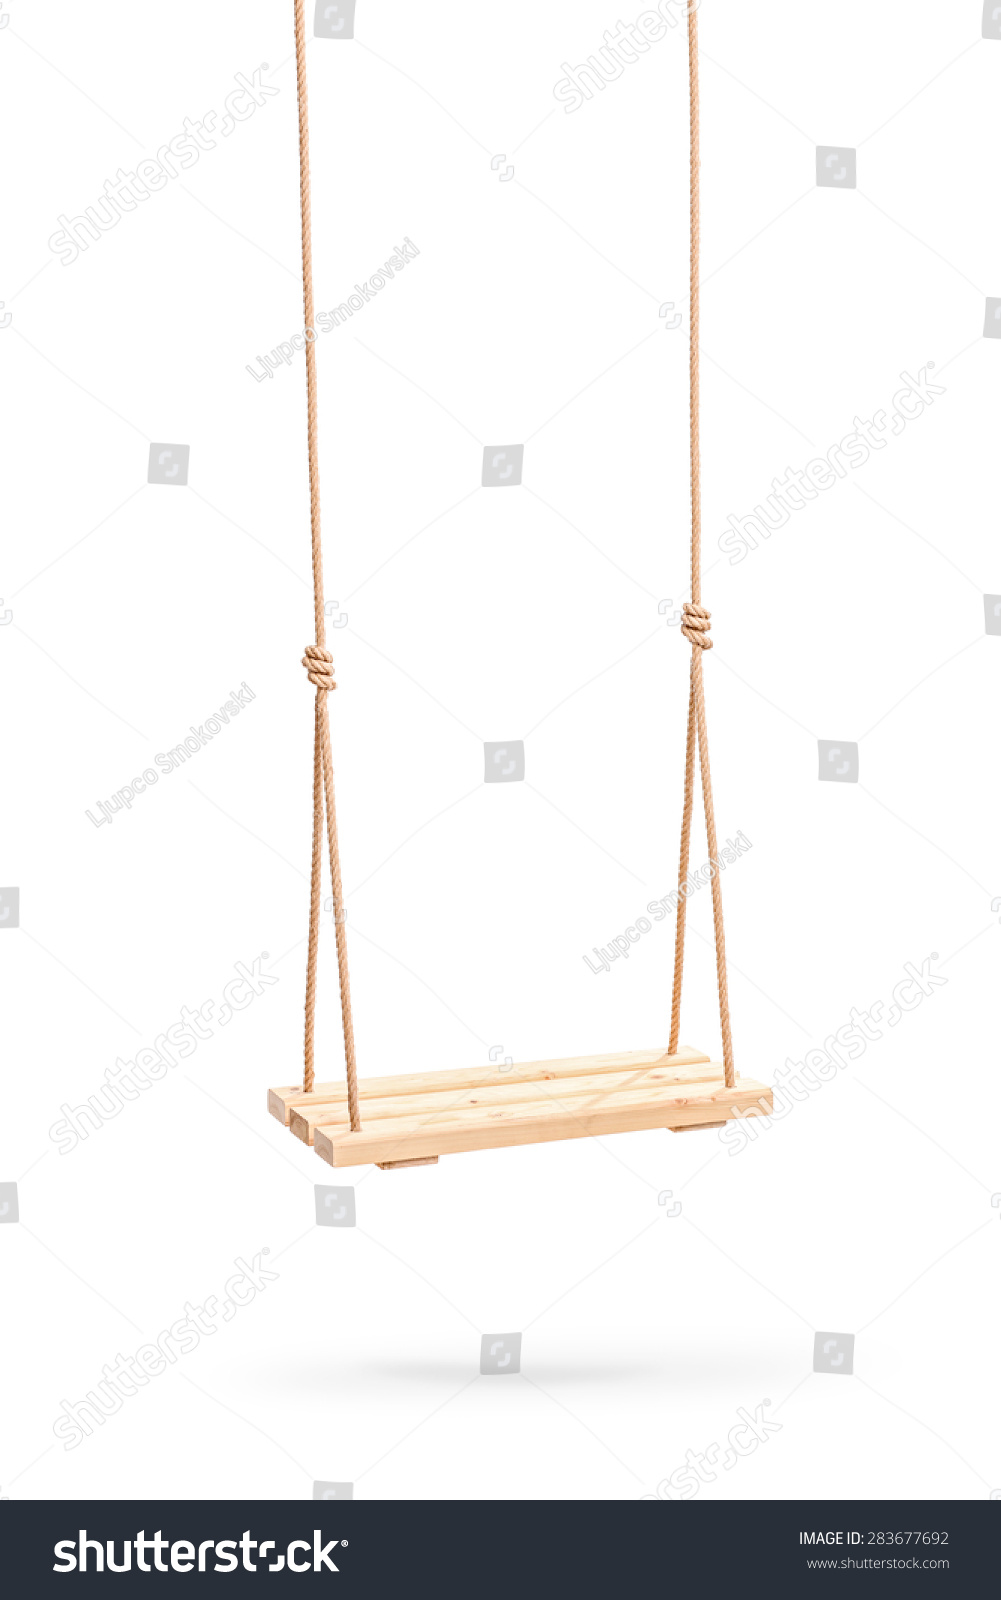 Vertical studio shot of a wooden swing hanging on a couple of ropes isolated on white background #283677692